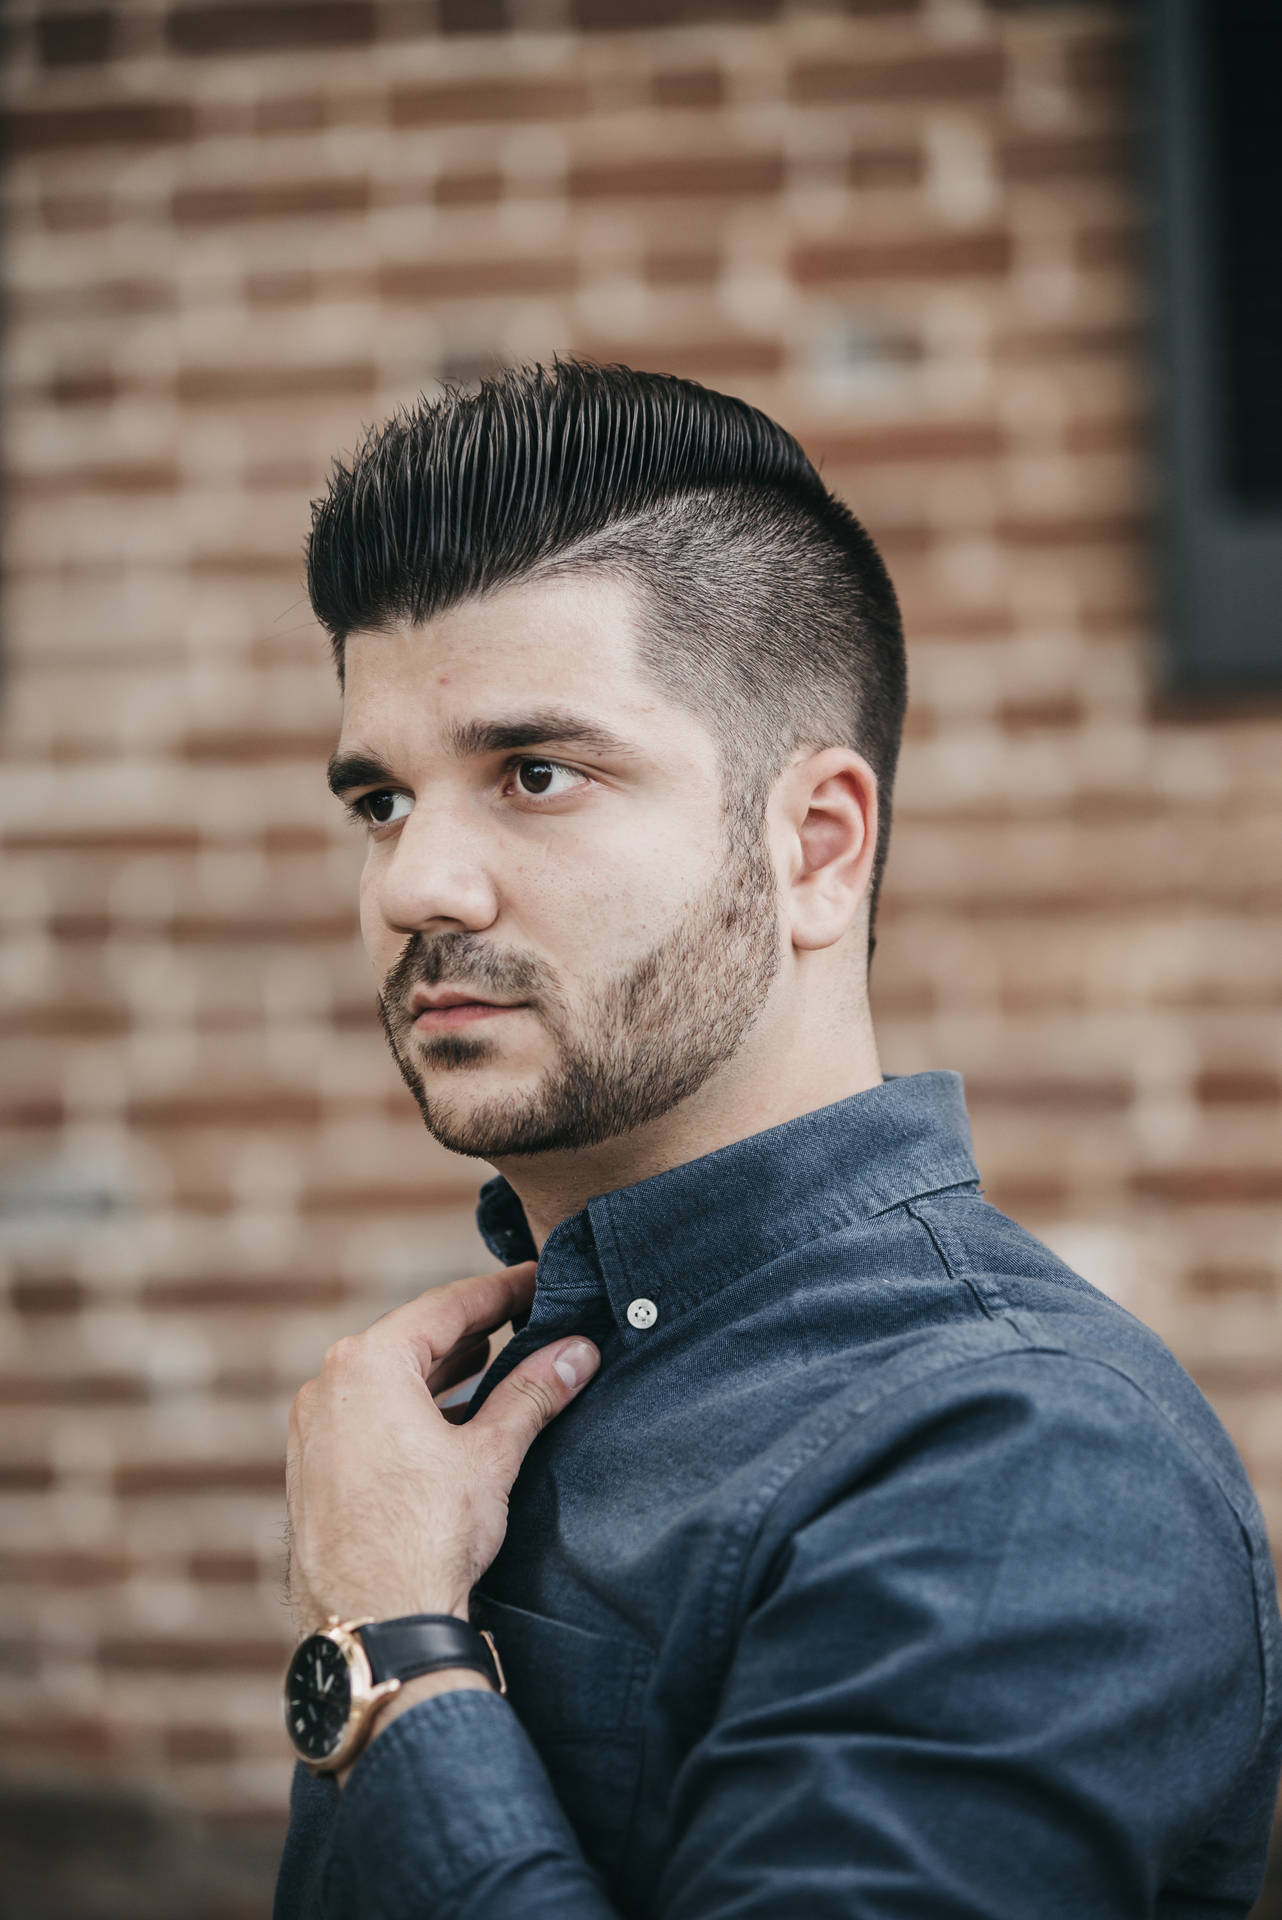 Man Posing With New Haircut Background